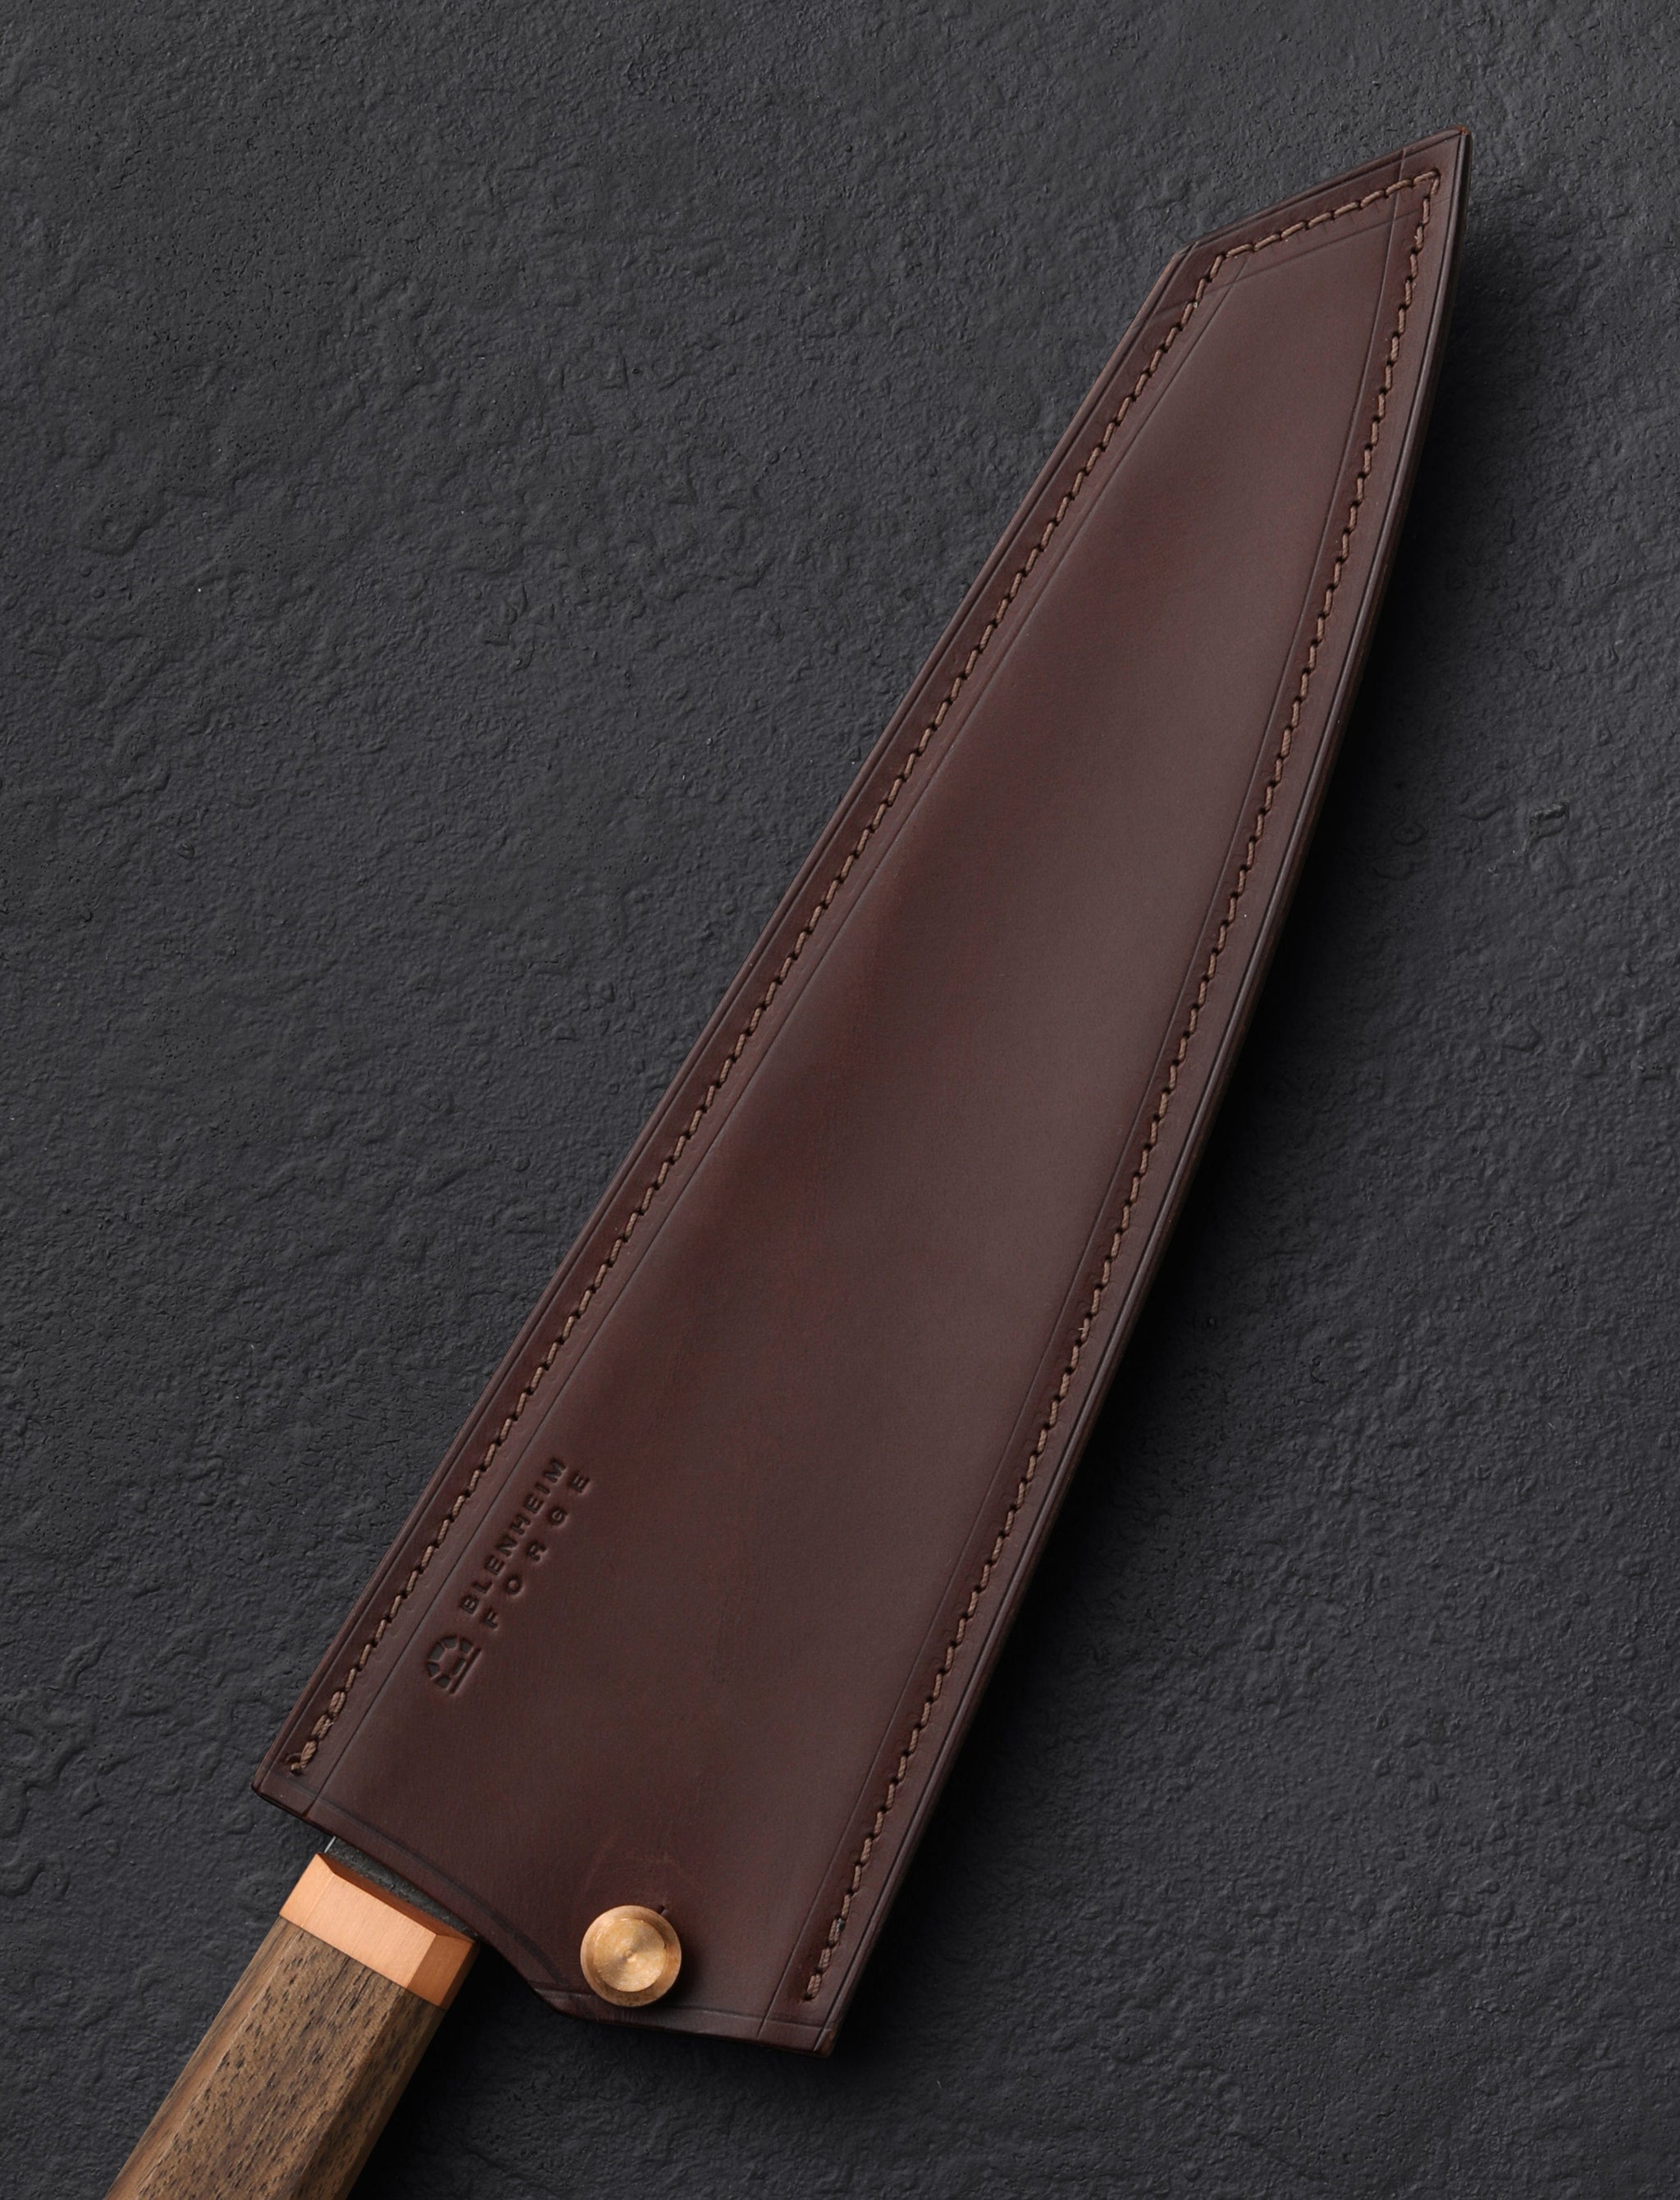 Chef Knife Sheath Leather Scabbard Kitchen Knives Holder With Belt